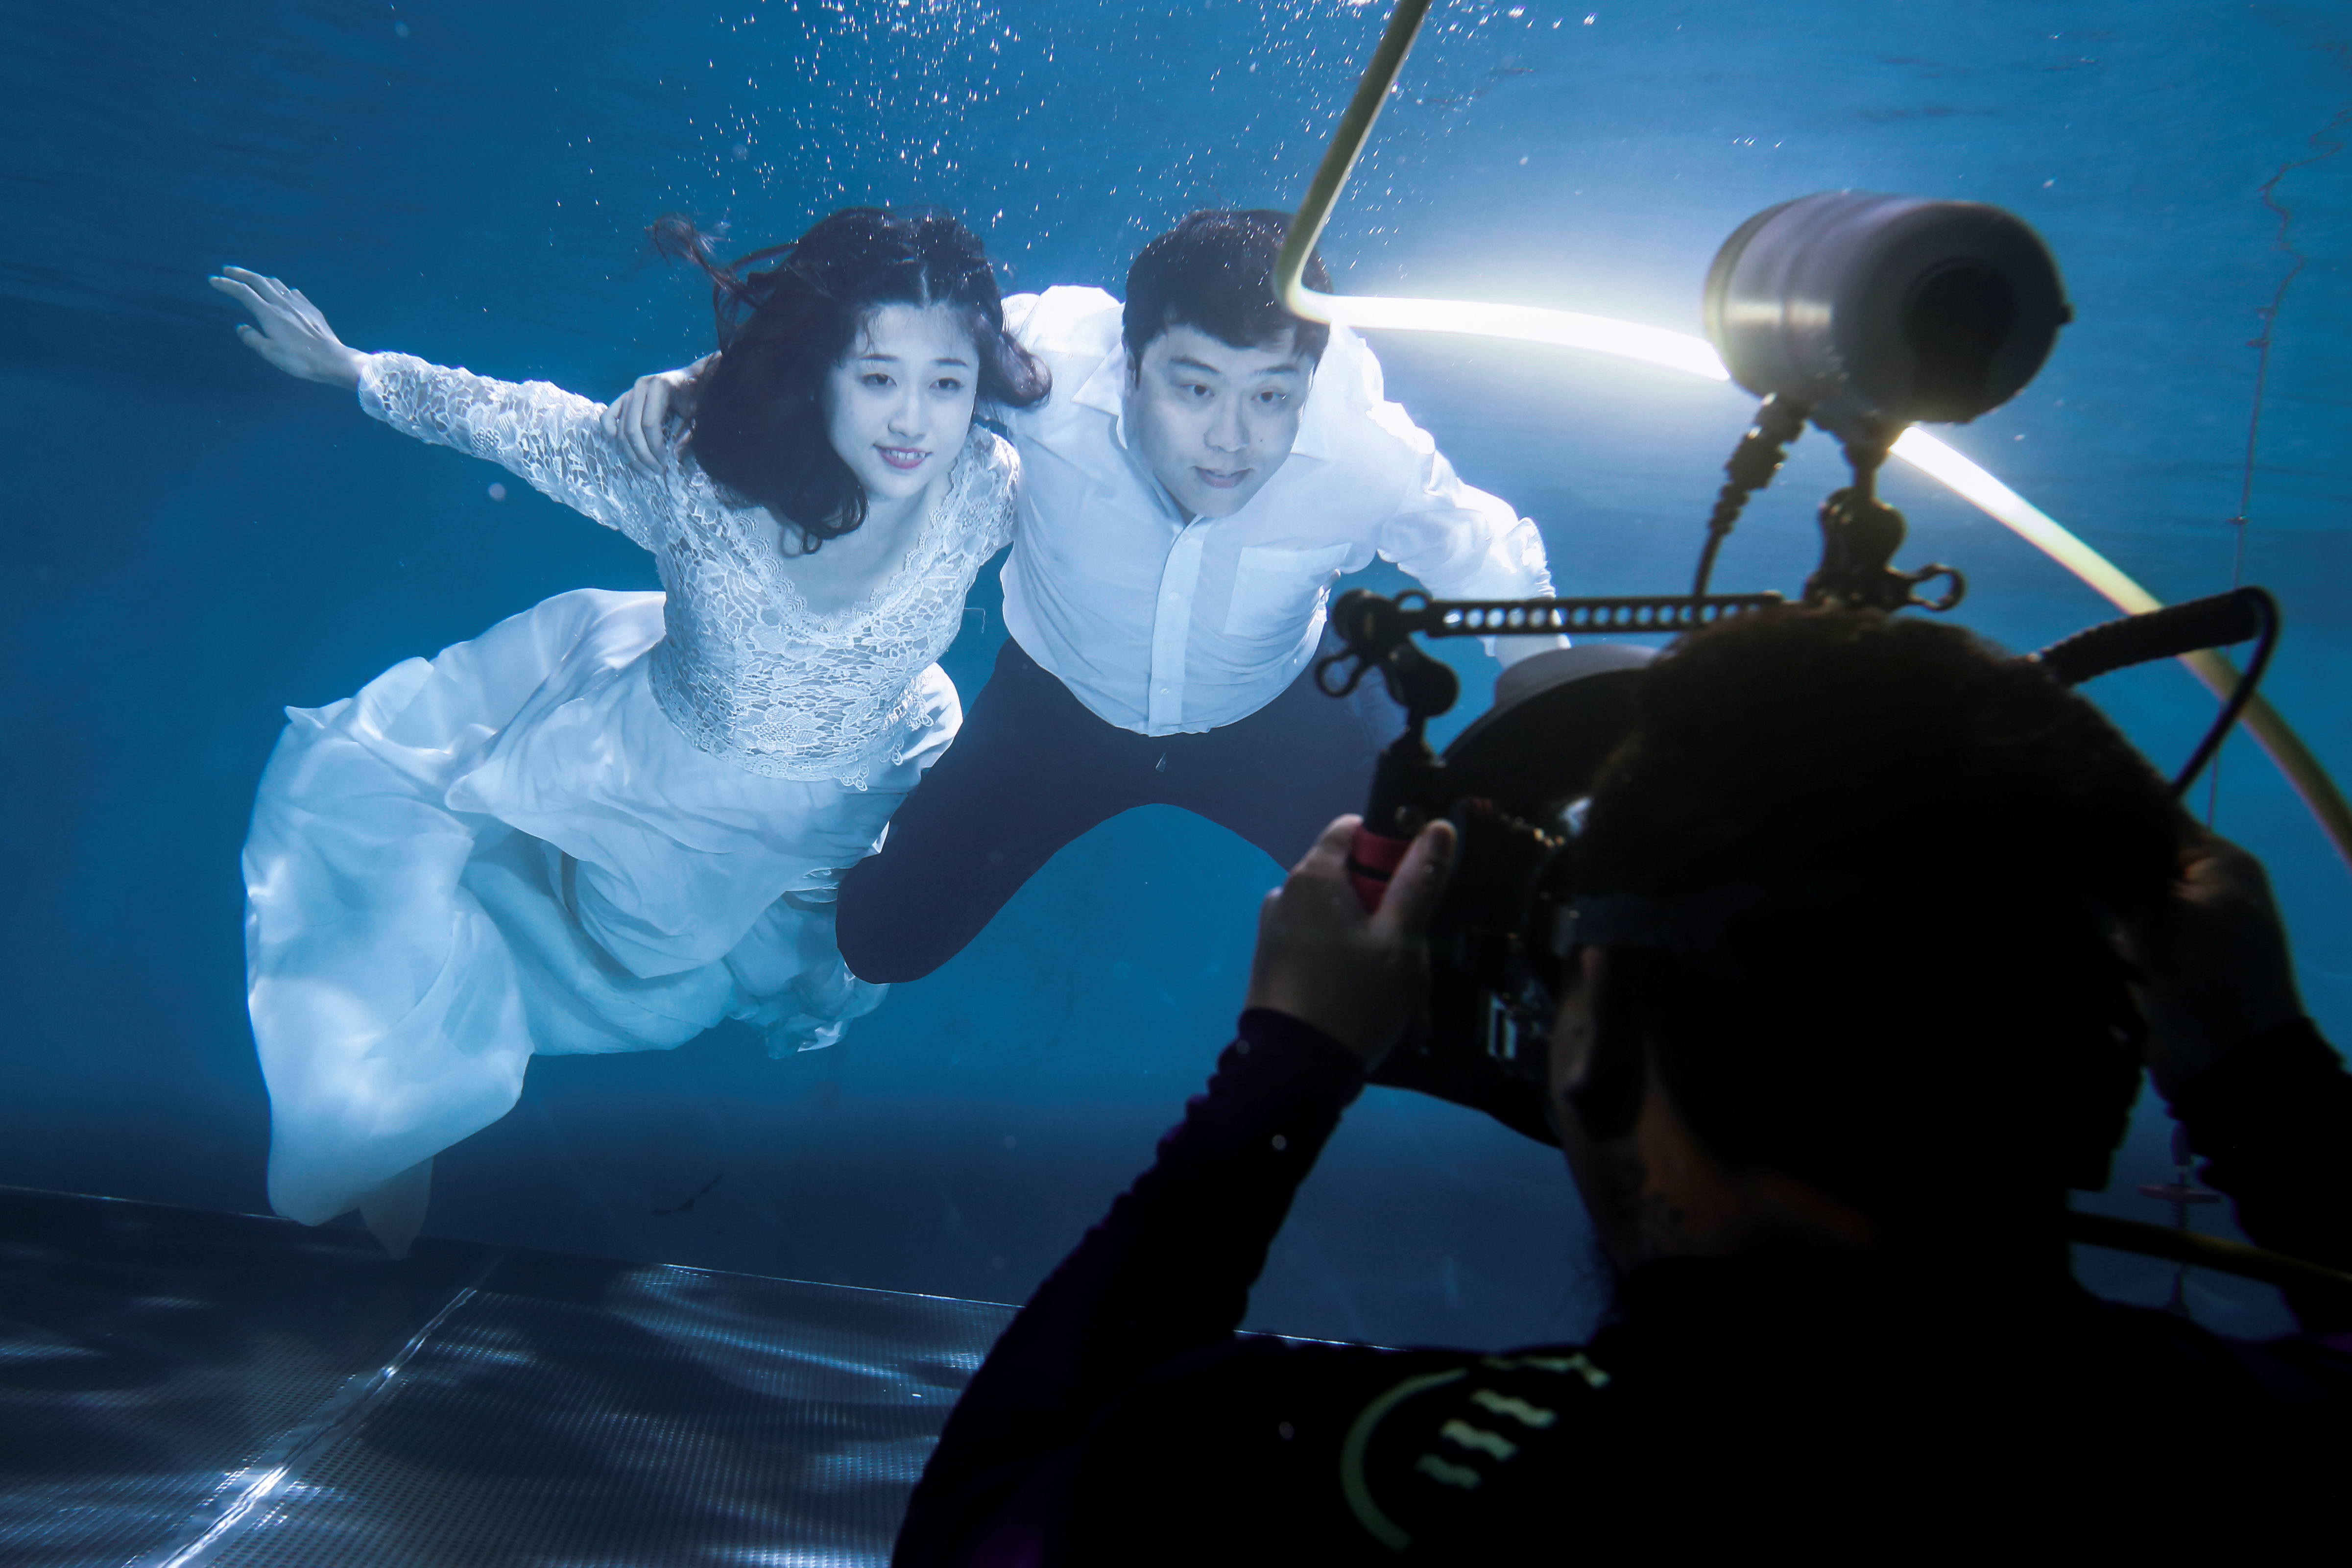 A newly married couple has their wedding photos taken underwater in Beijing.